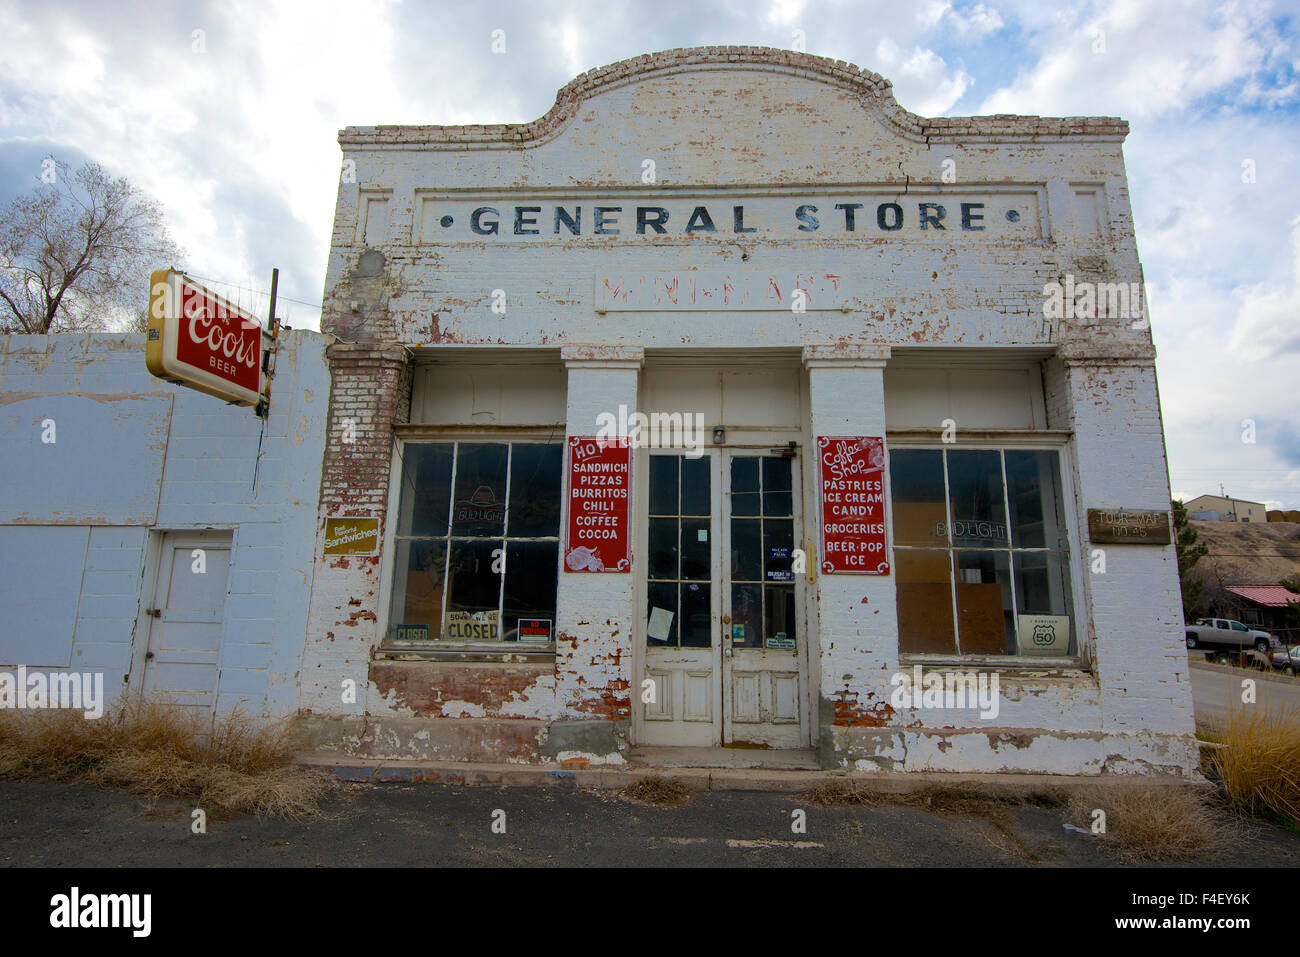 The abandoned General Store in Eureka, Nevada is an example of the towns fading glory and past. (Large format sizes available) Stock Photo